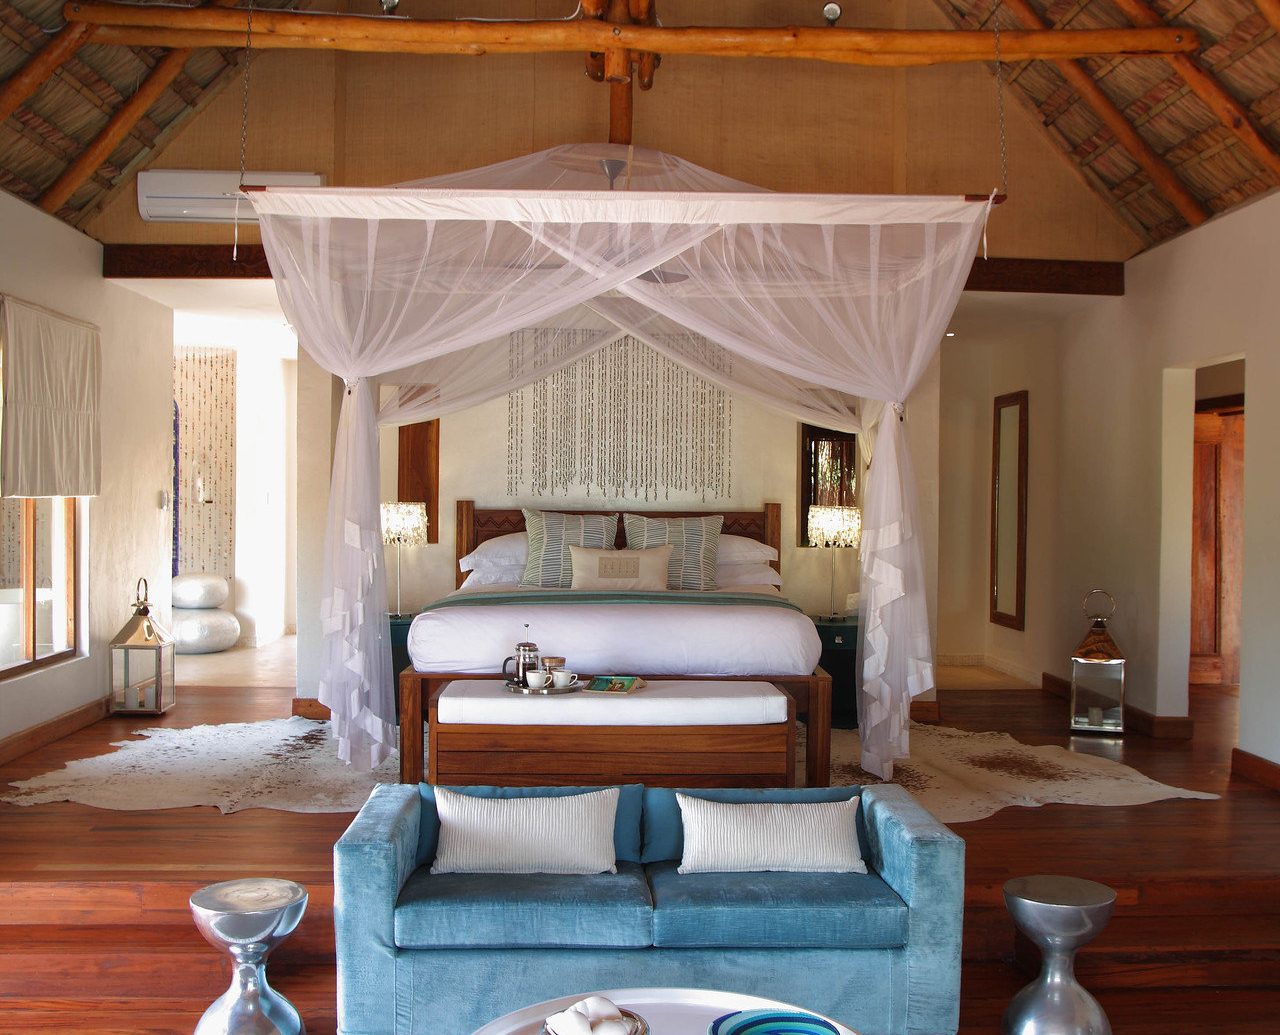 bed Bedroom canopy canopy bed charming cozy homey Hotels hut Luxury Rustic indoor floor room ceiling property house estate swimming pool Living home living room interior design cottage Villa mansion Design Resort farmhouse furniture